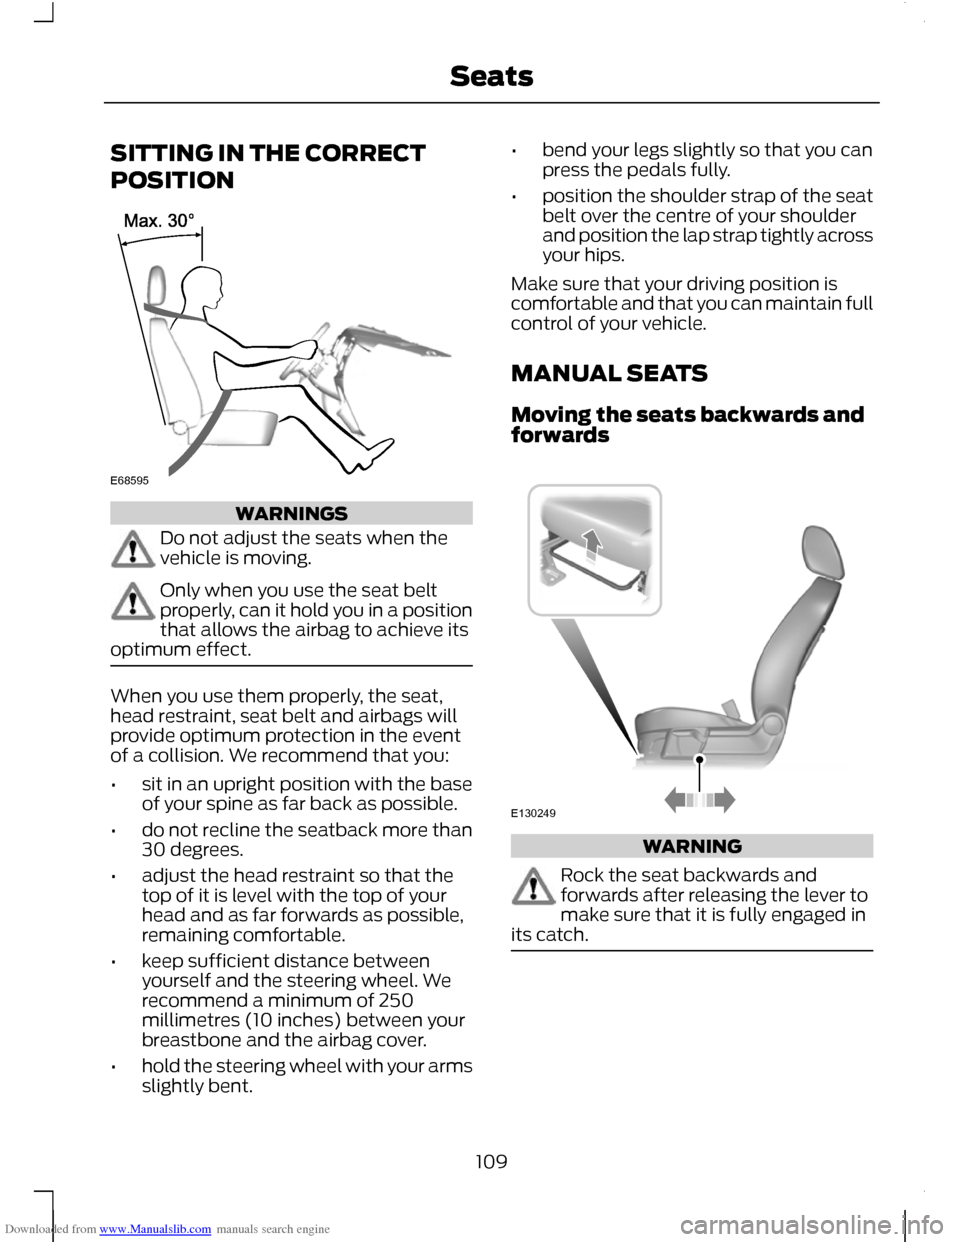 FORD C MAX 2011 2.G Owners Manual Downloaded from www.Manualslib.com manuals search engine SITTING IN THE CORRECT
POSITION
WARNINGS
Do not adjust the seats when the
vehicle is moving.
Only when you use the seat belt
properly, can it h